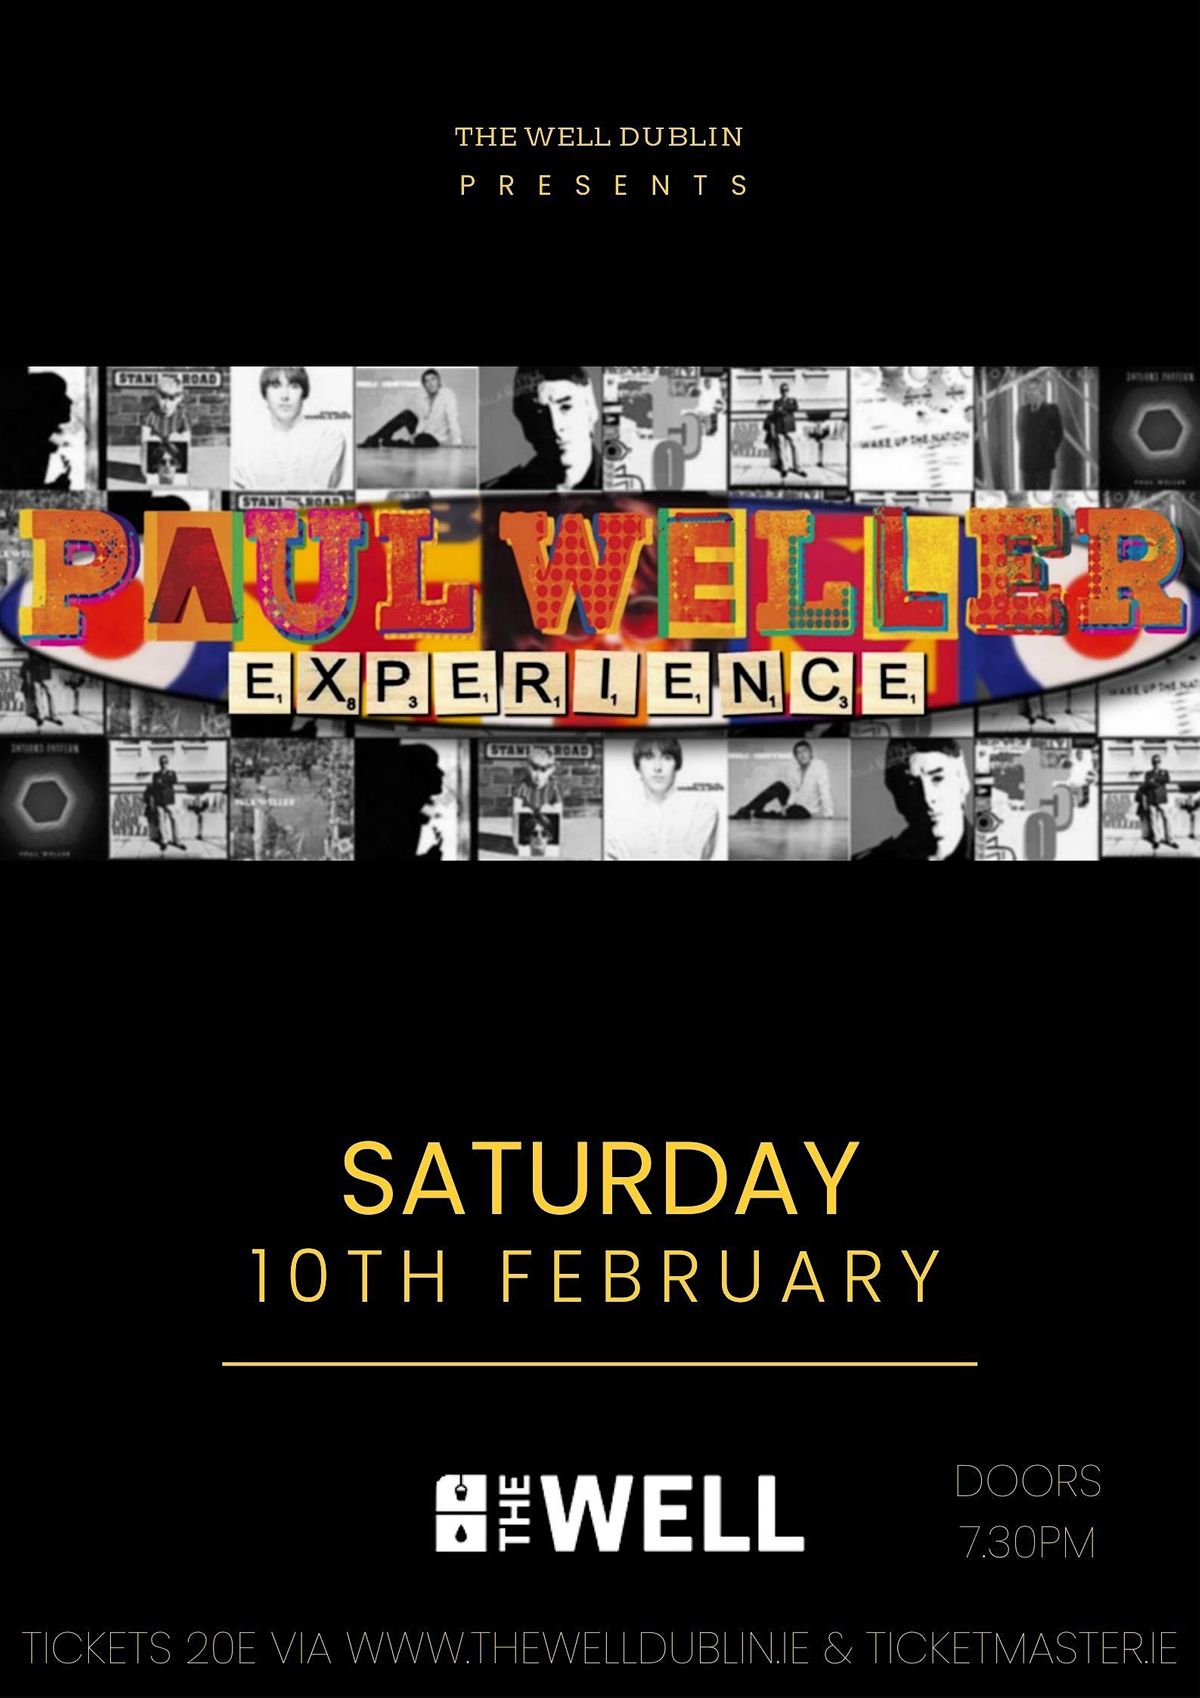 The Paul Weller Experience - Live in Concert